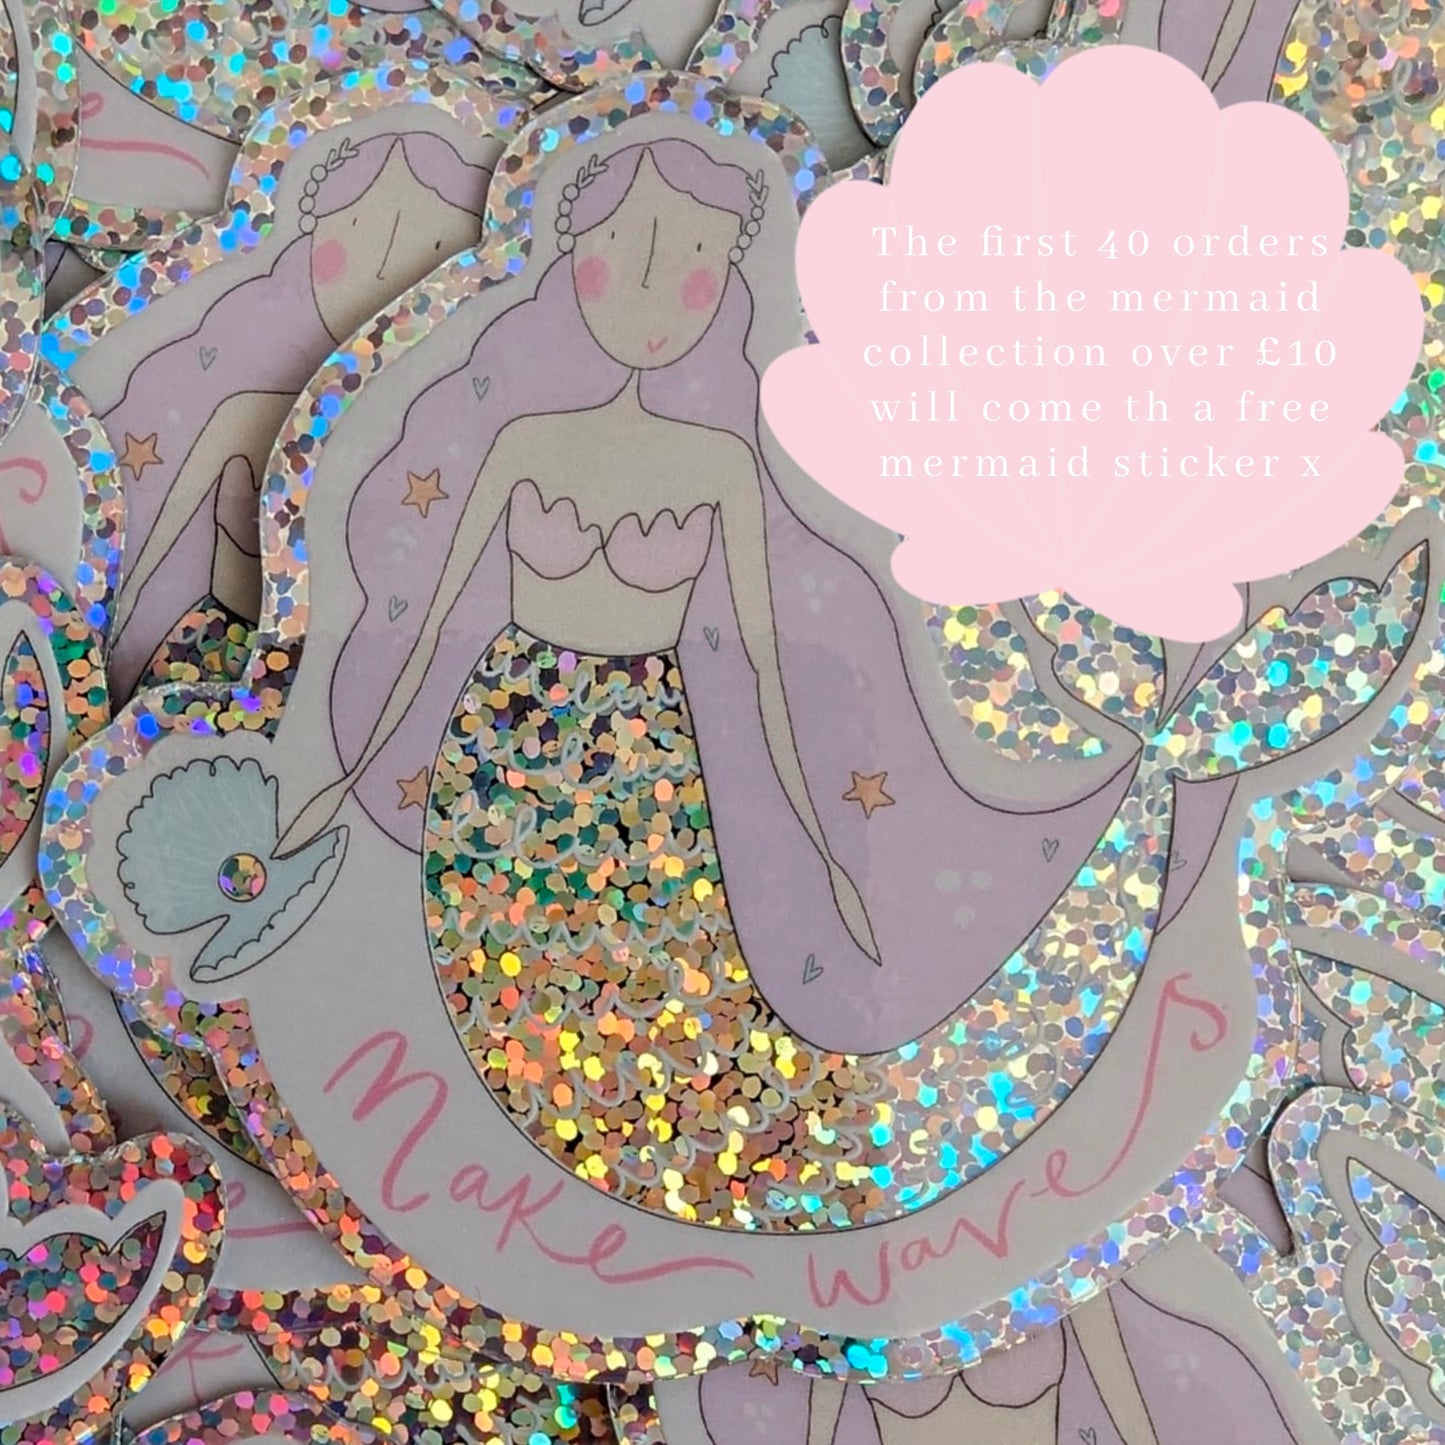 Make waves pastel mermaid print  - 3D mounted shell - gold foil under the sea fairytale print